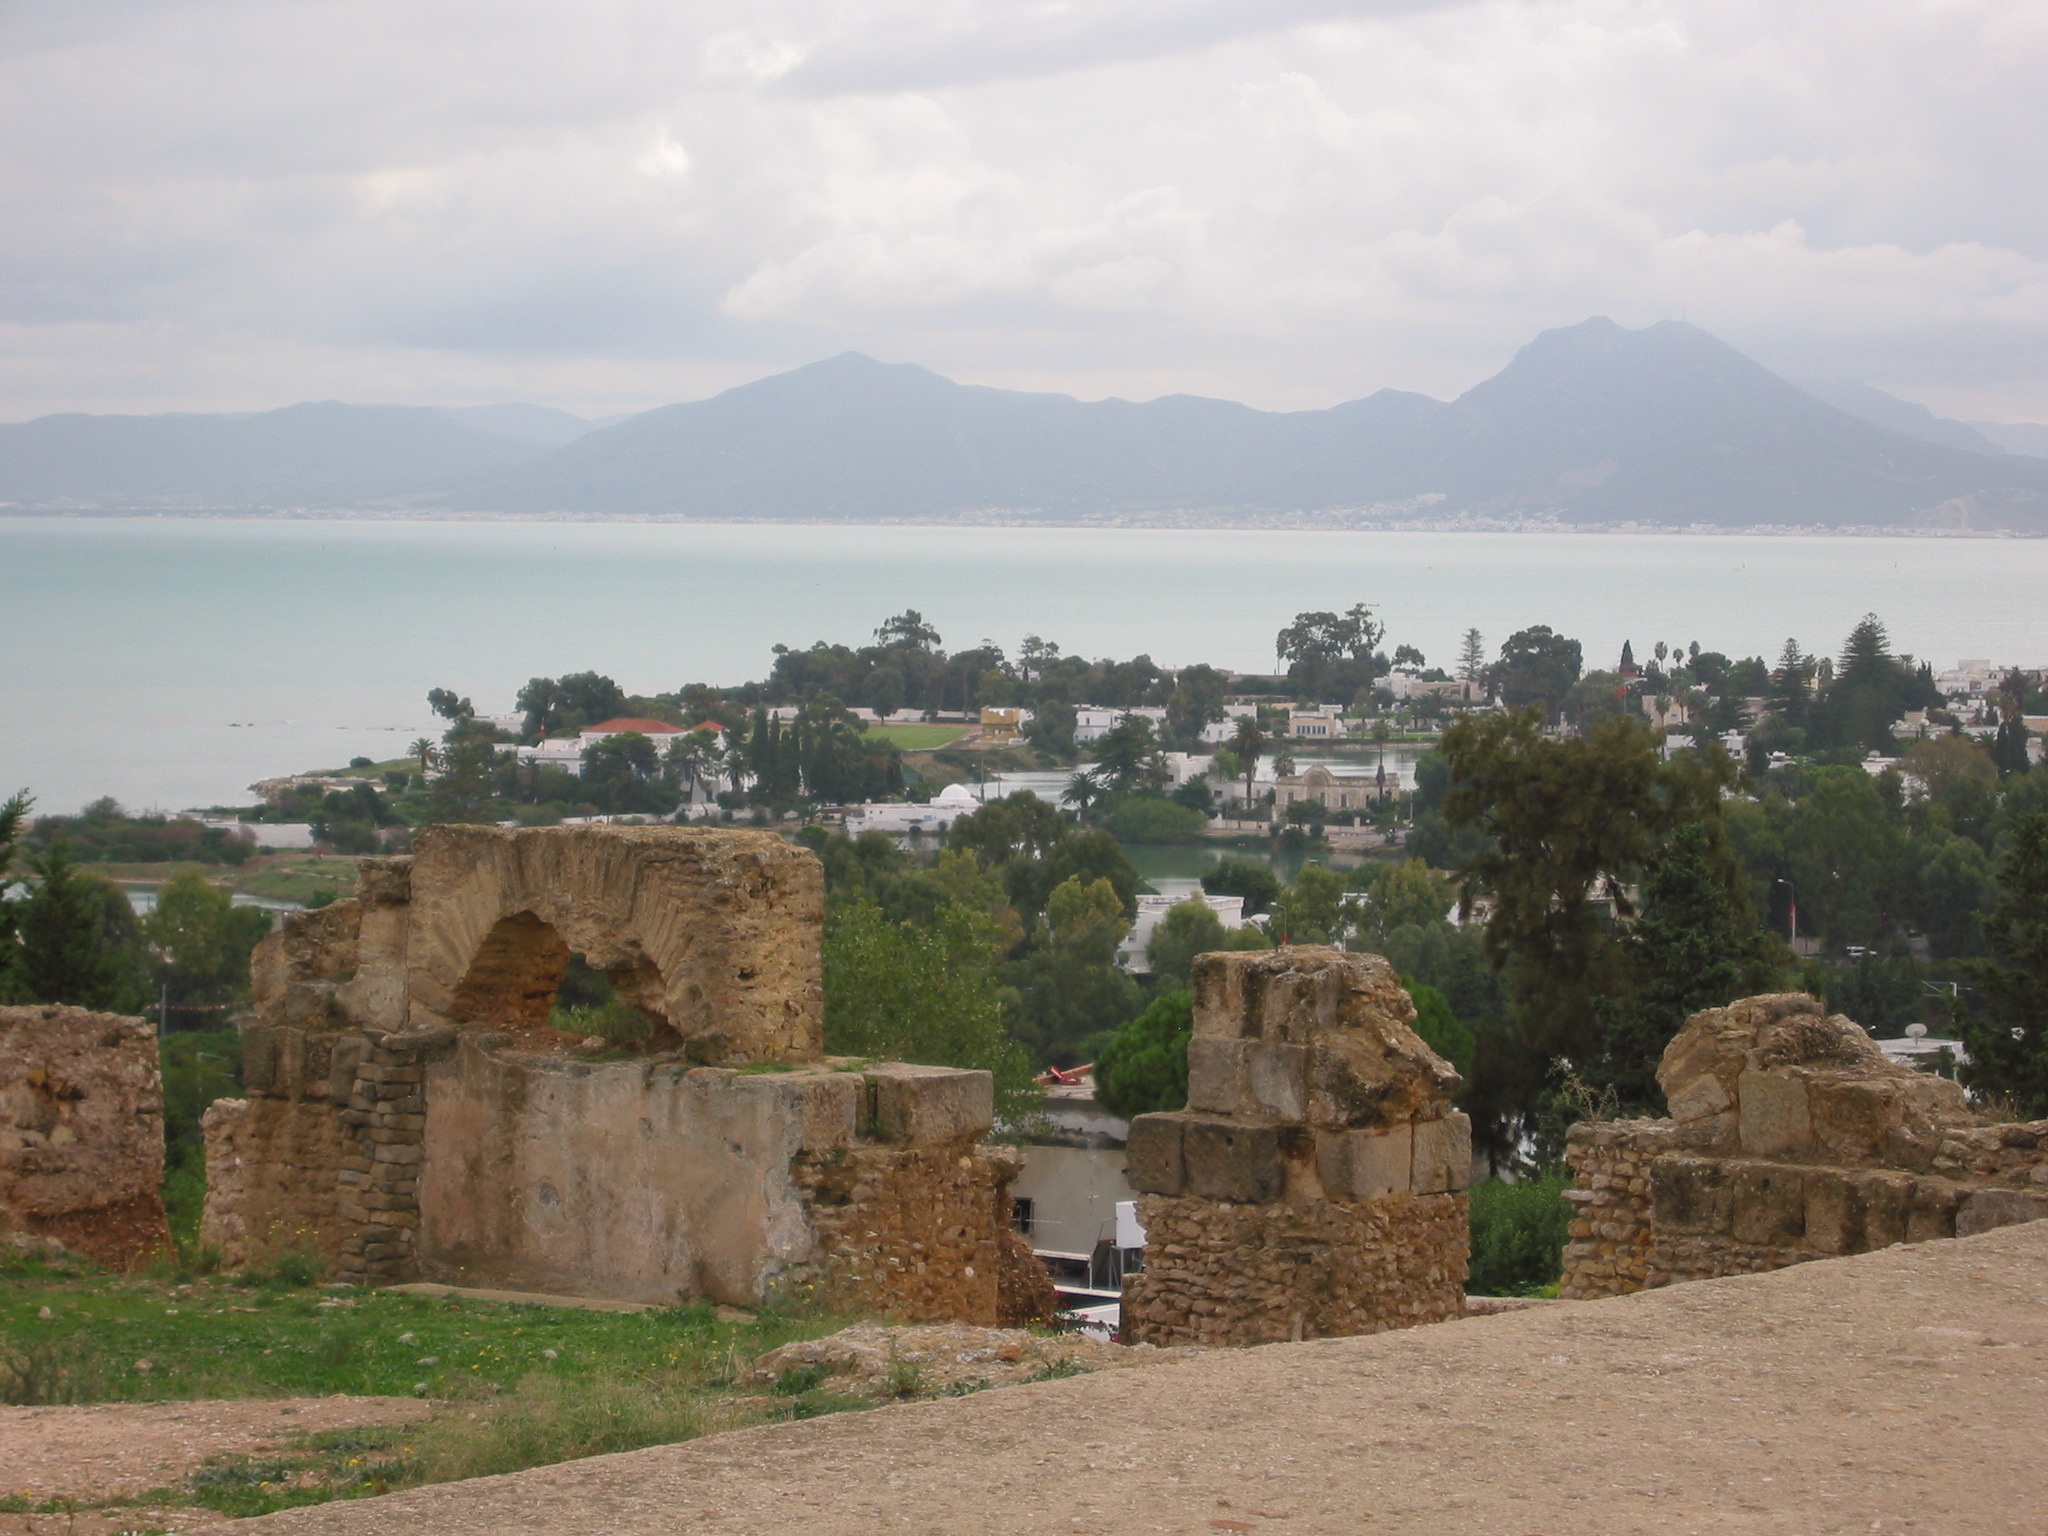 Carthage - not much left...